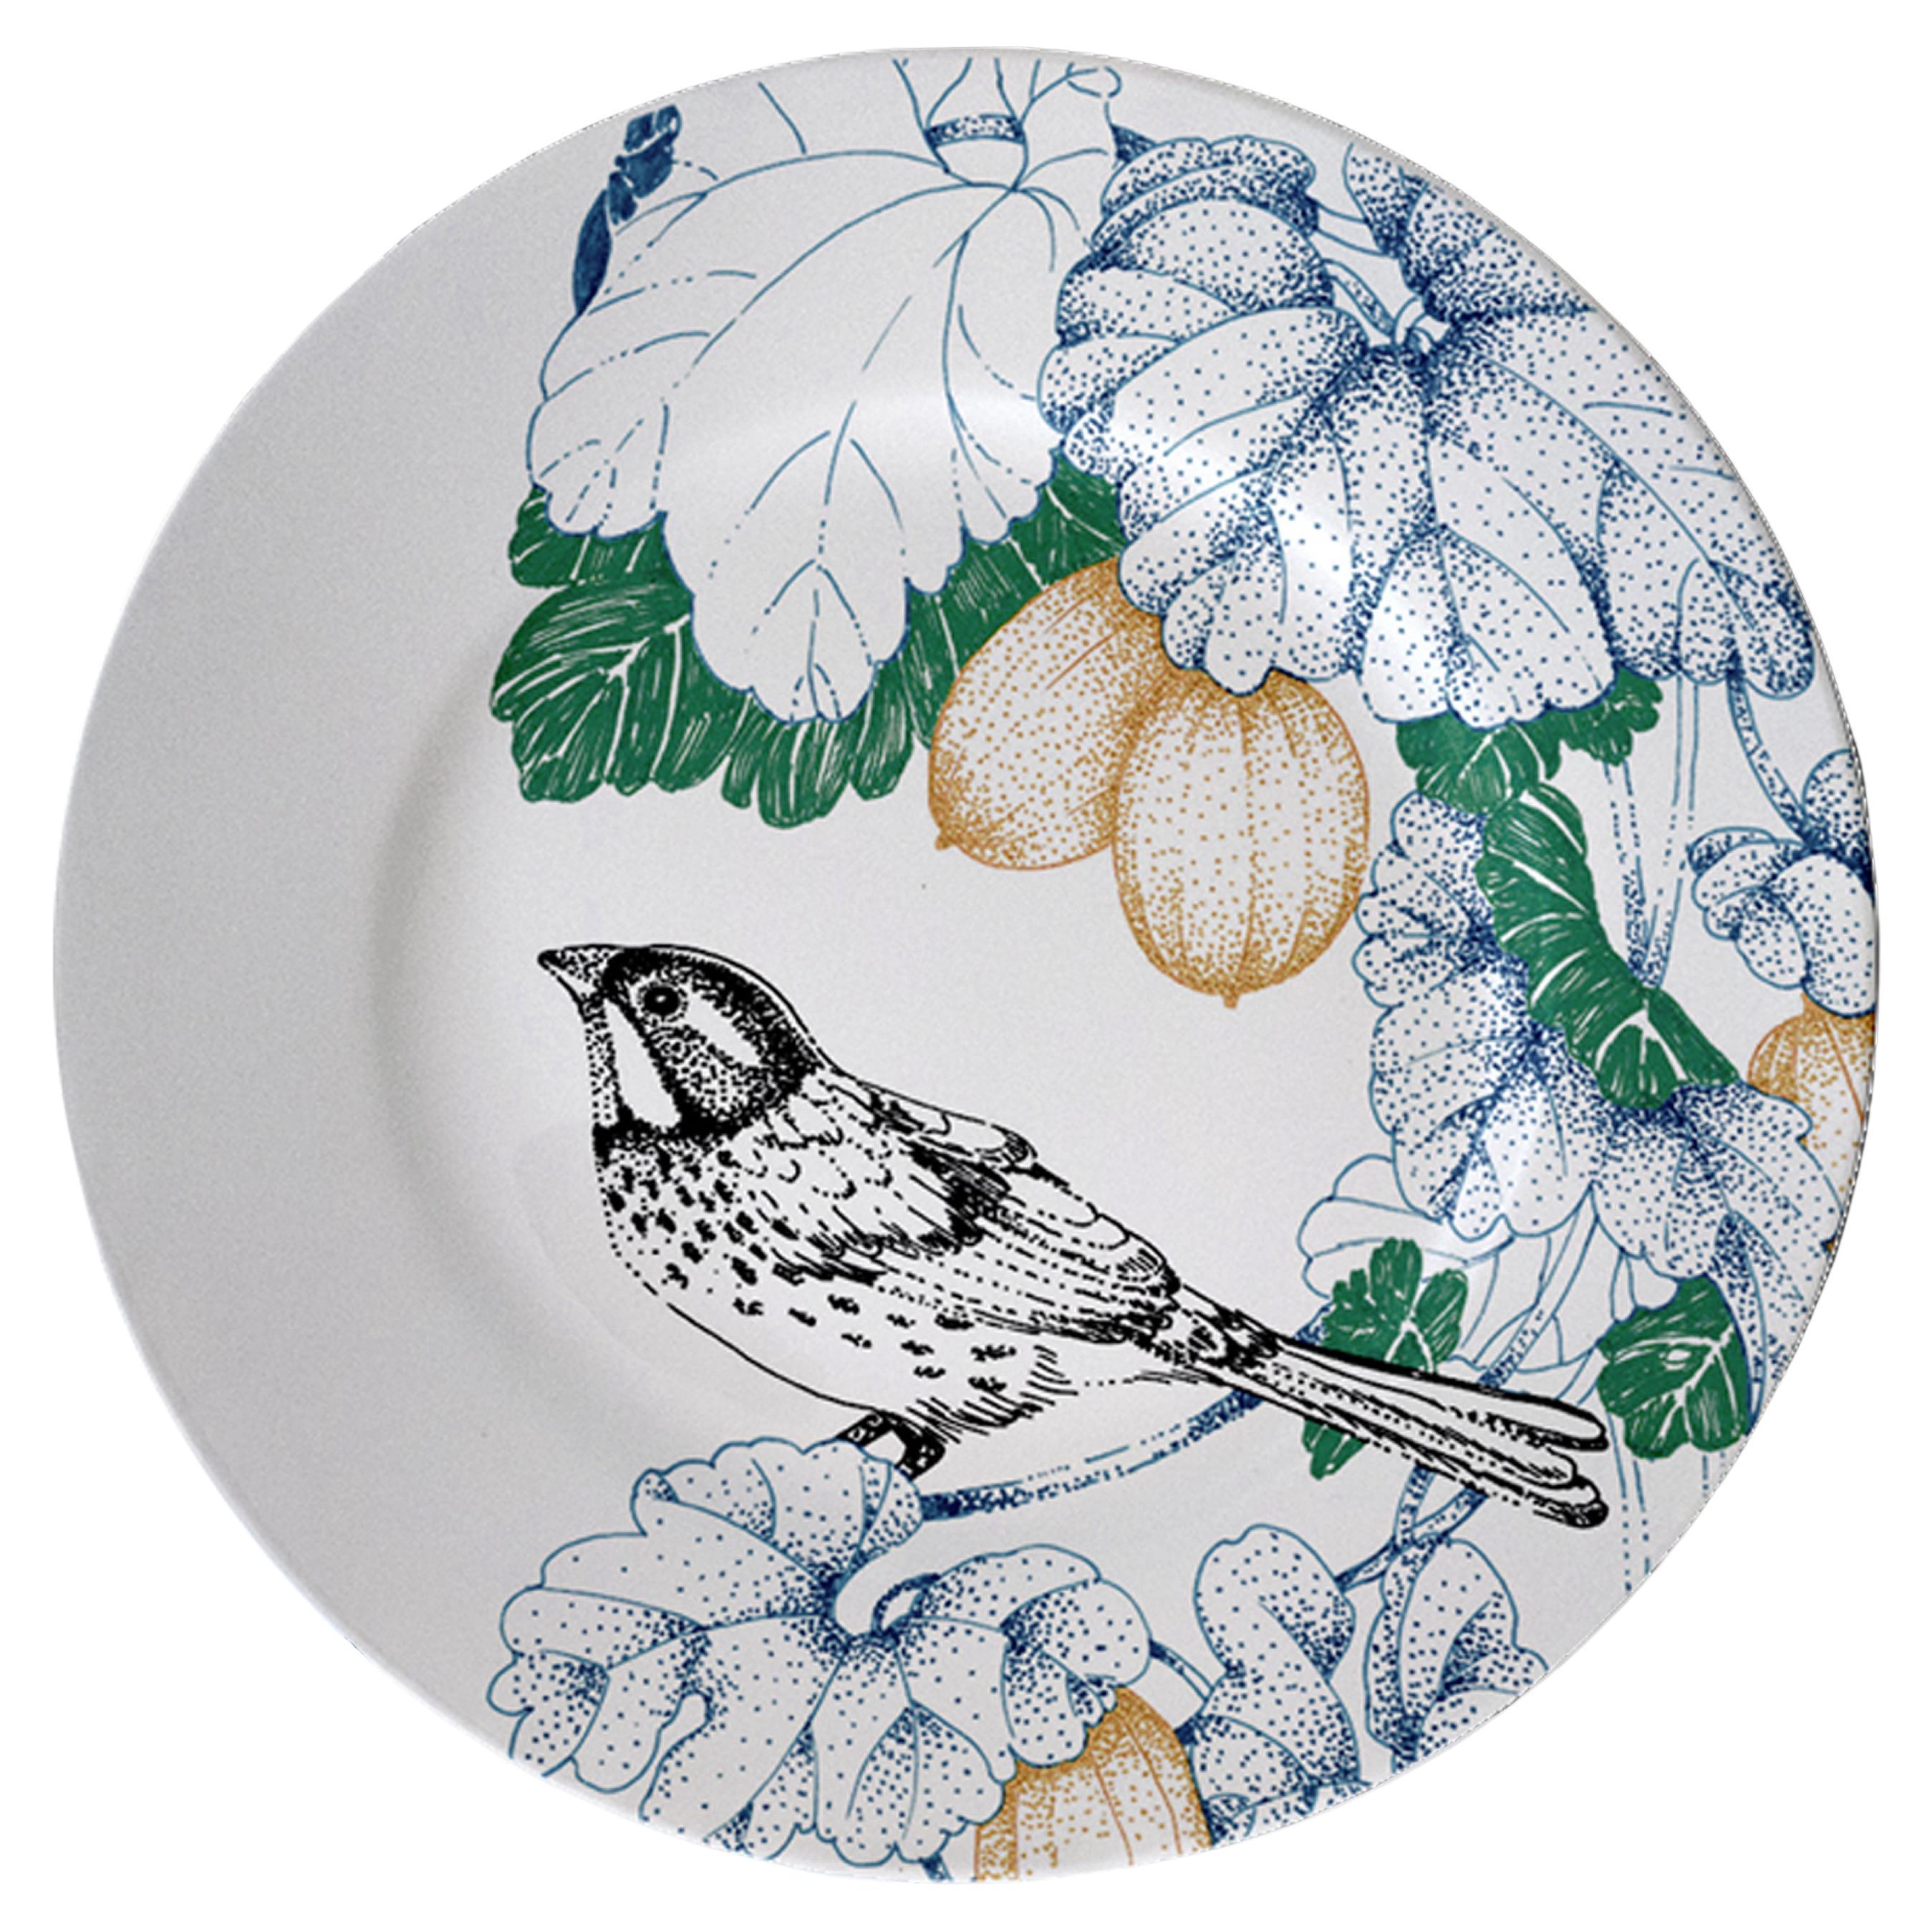 Bird Song, Contemporary Porcelain Bread Plate with Birds and Flowers